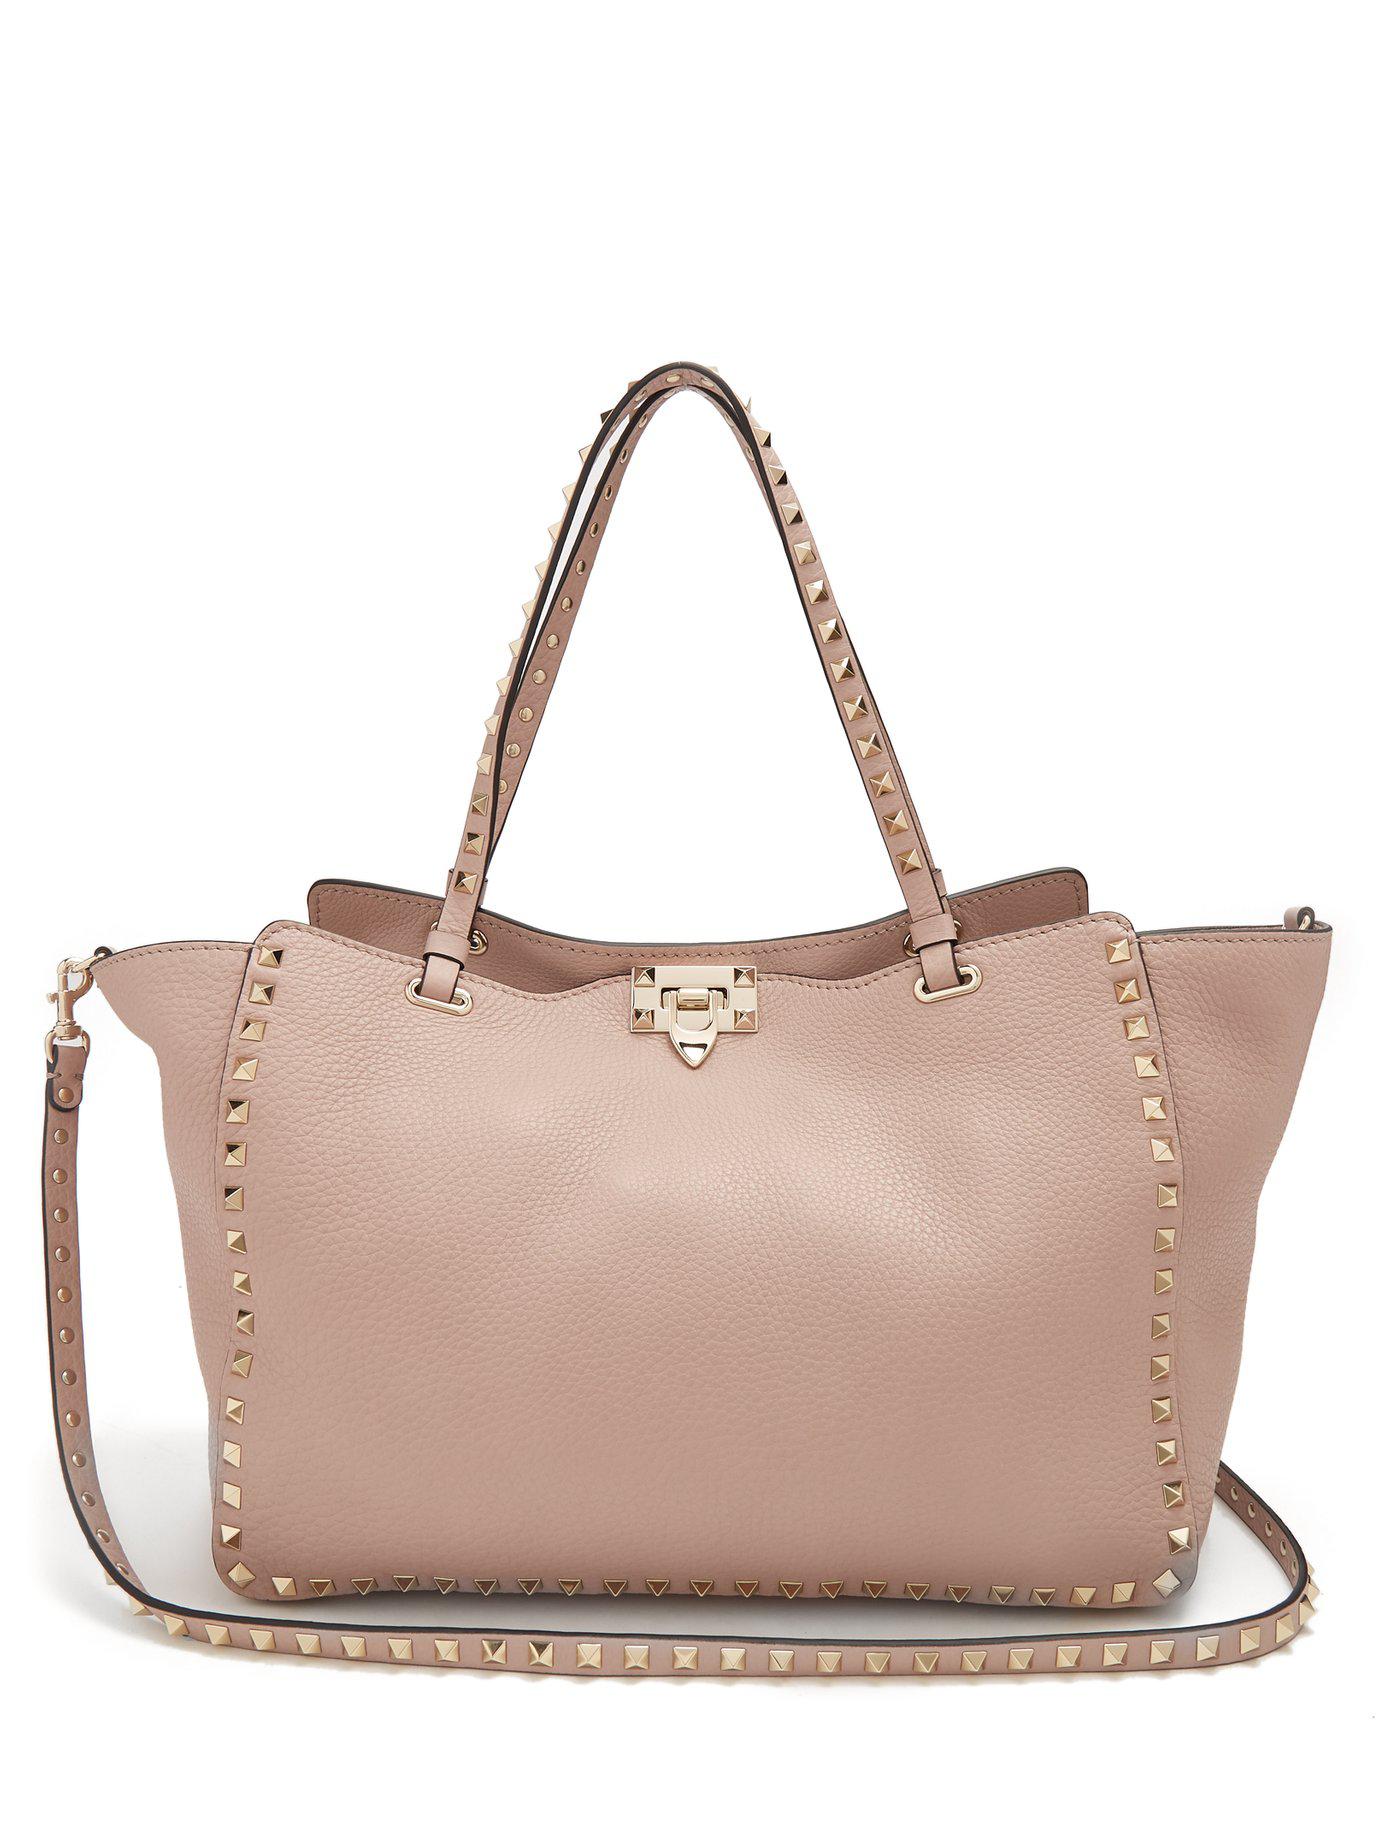 Valentino Rockstud Medium Leather Tote in Nude (Natural) Lyst